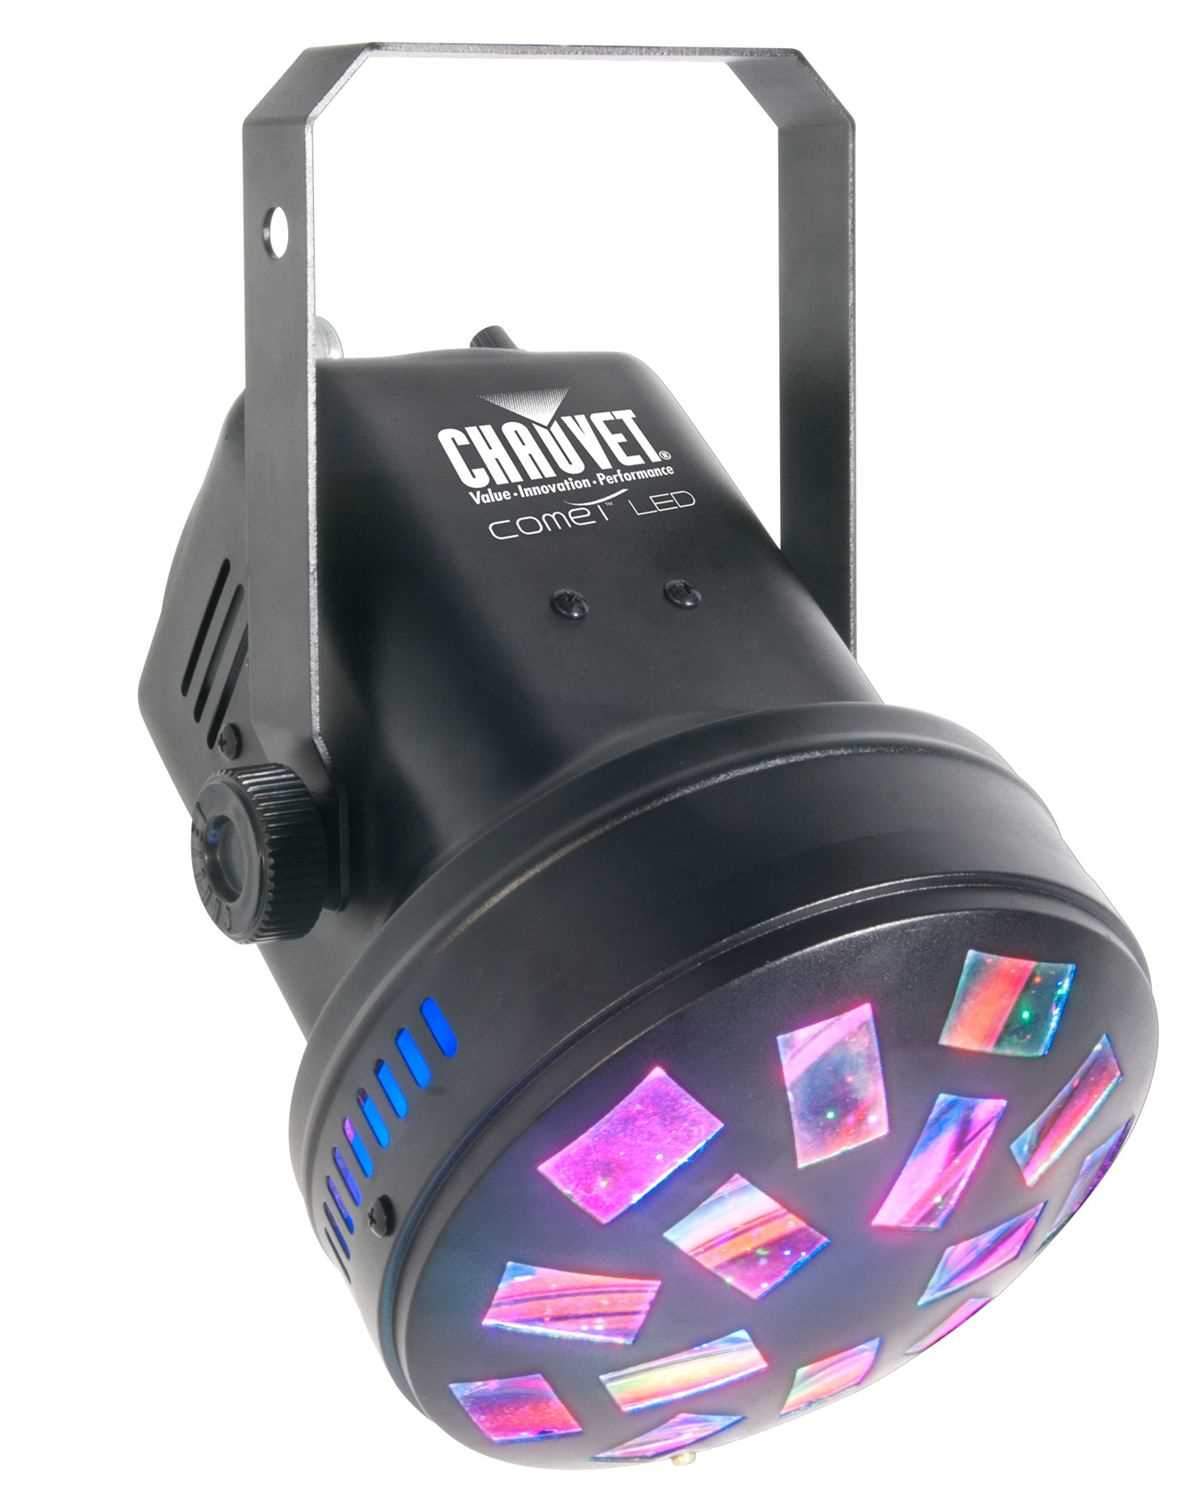 Chauvet Comet LED RGBW 4 x 1W Effect Light - ProSound and Stage Lighting